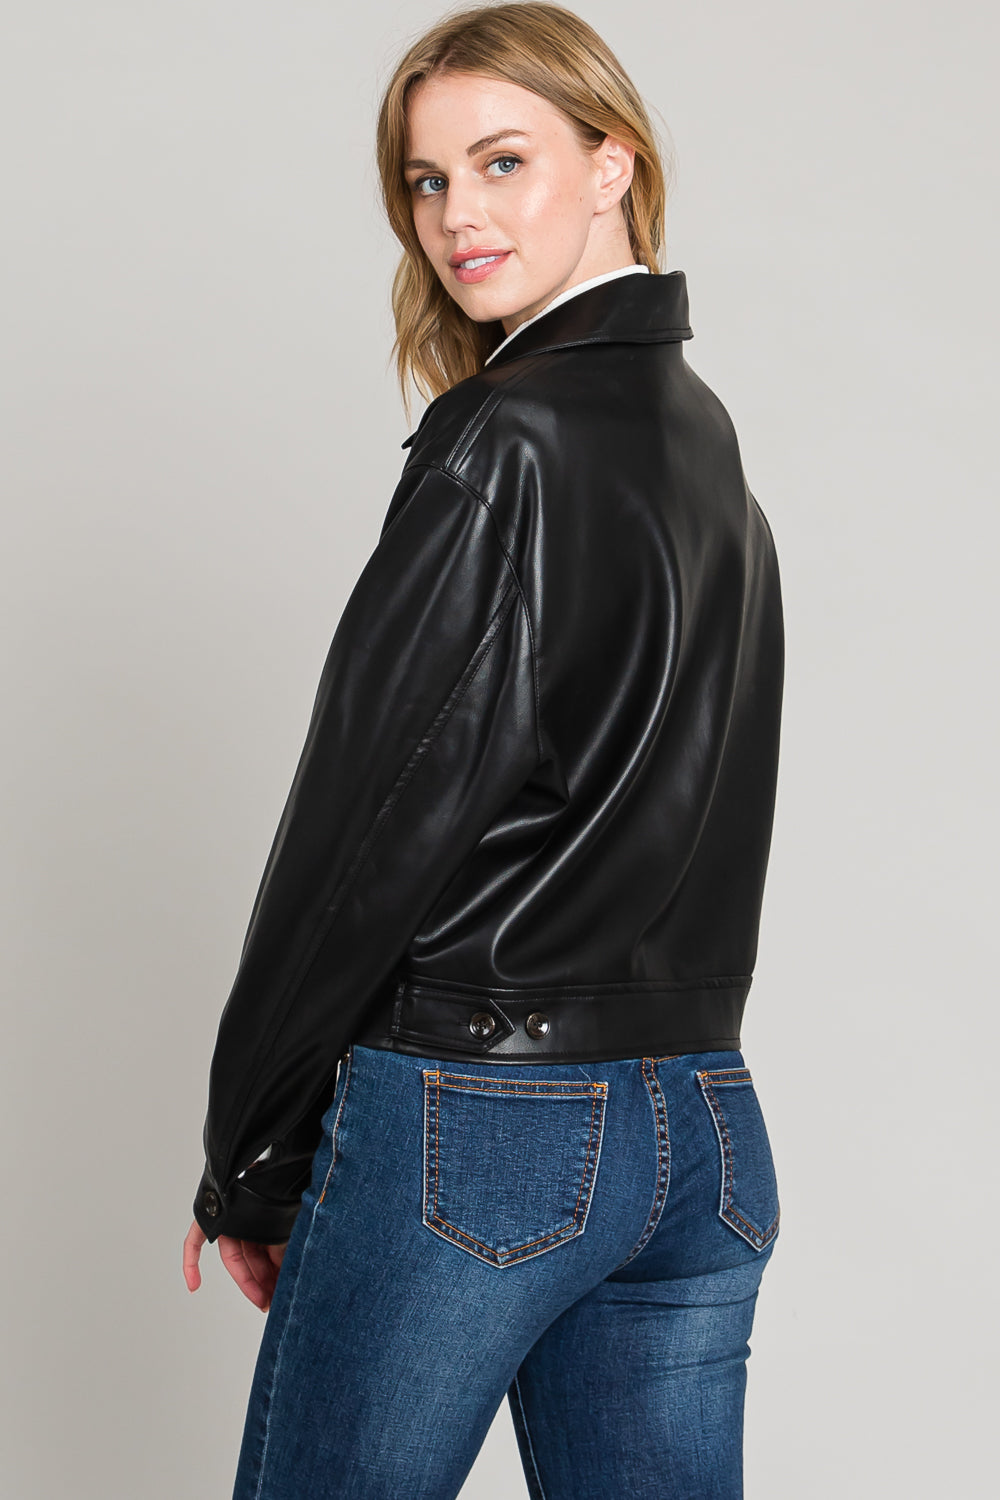 Soft Faux Leather zip front Moto Jacket! This gorgeous jacket is crafted from buttery soft faux leather that feels amazing to the touch. It's also super comfortable and just warm enough, making it perfect for those chilly autumn days and nights. Add a little edge to your outfit with this must-have jacket!